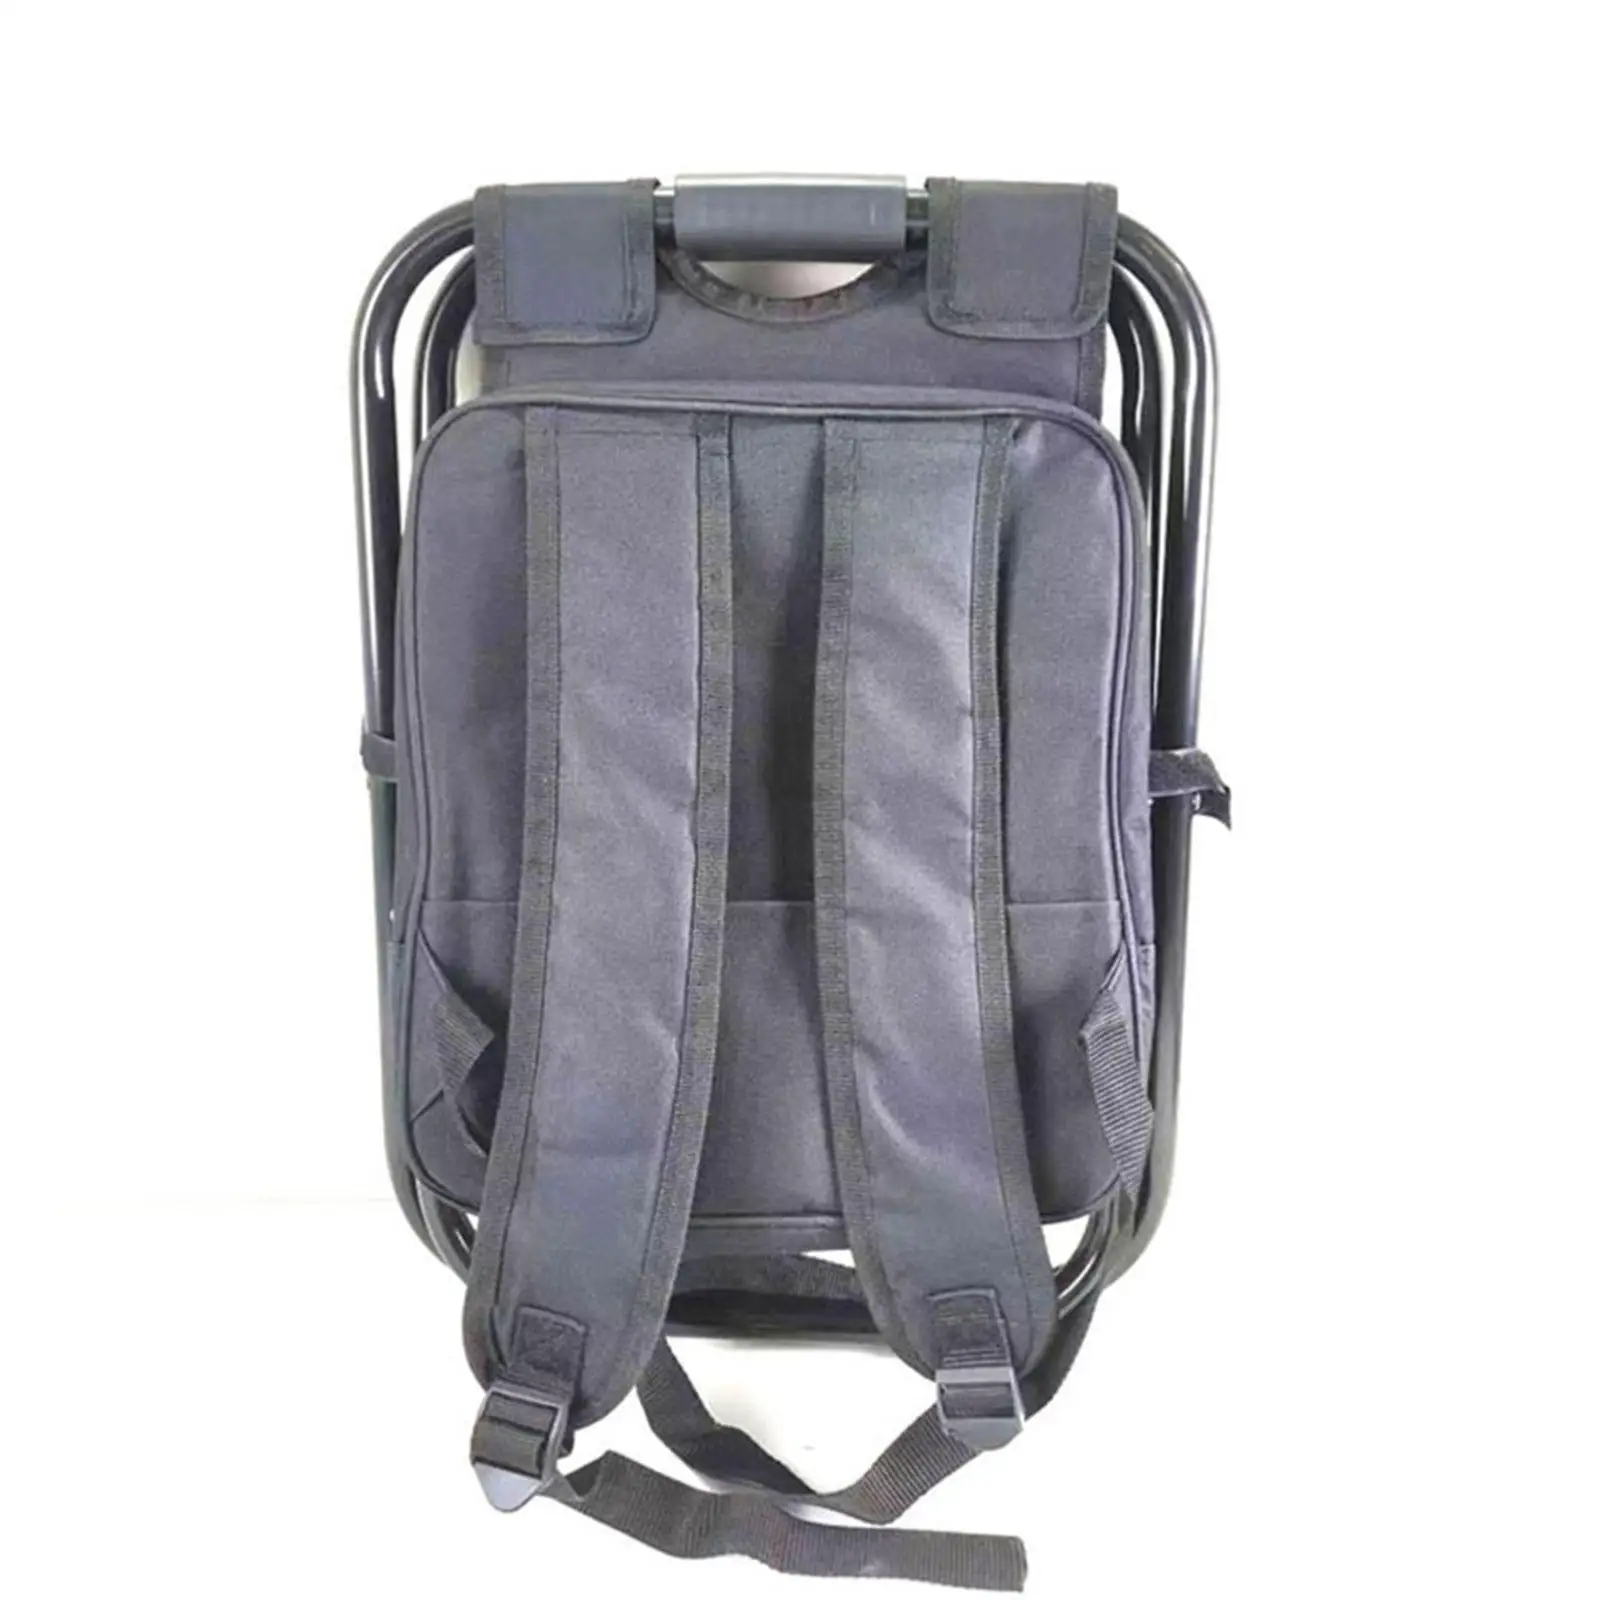 Backpack Chairs Lightweight Camping Chair Portable with Straps Convenient Carry